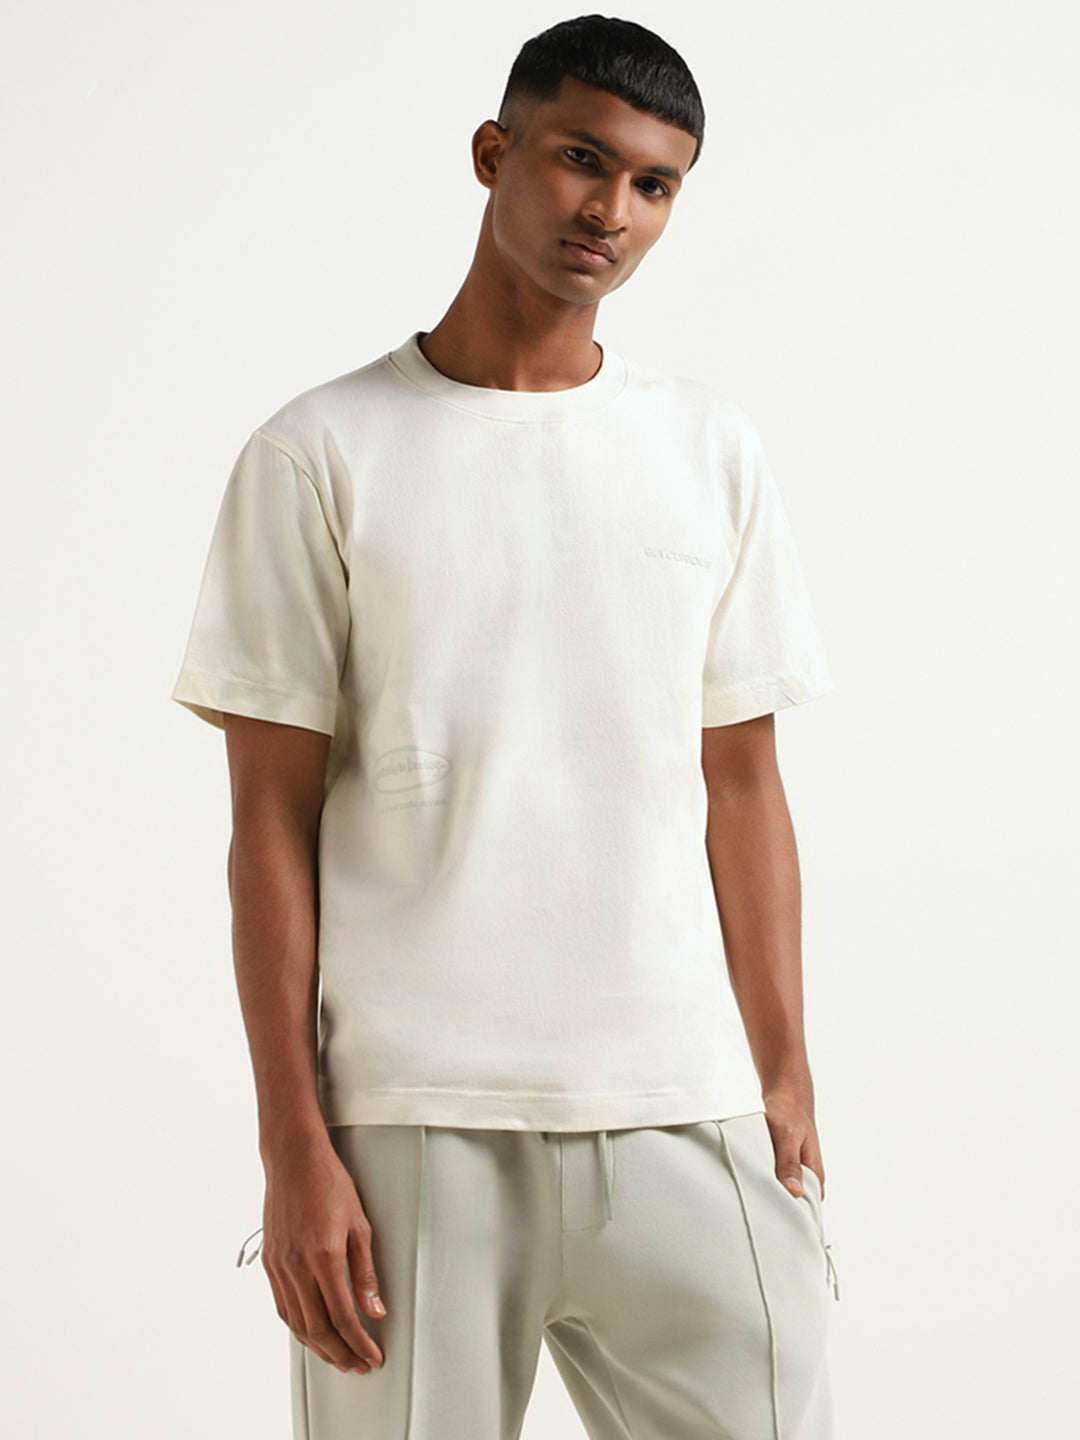 Studiofit Off-White Printed Relaxed-Fit T-Shirt